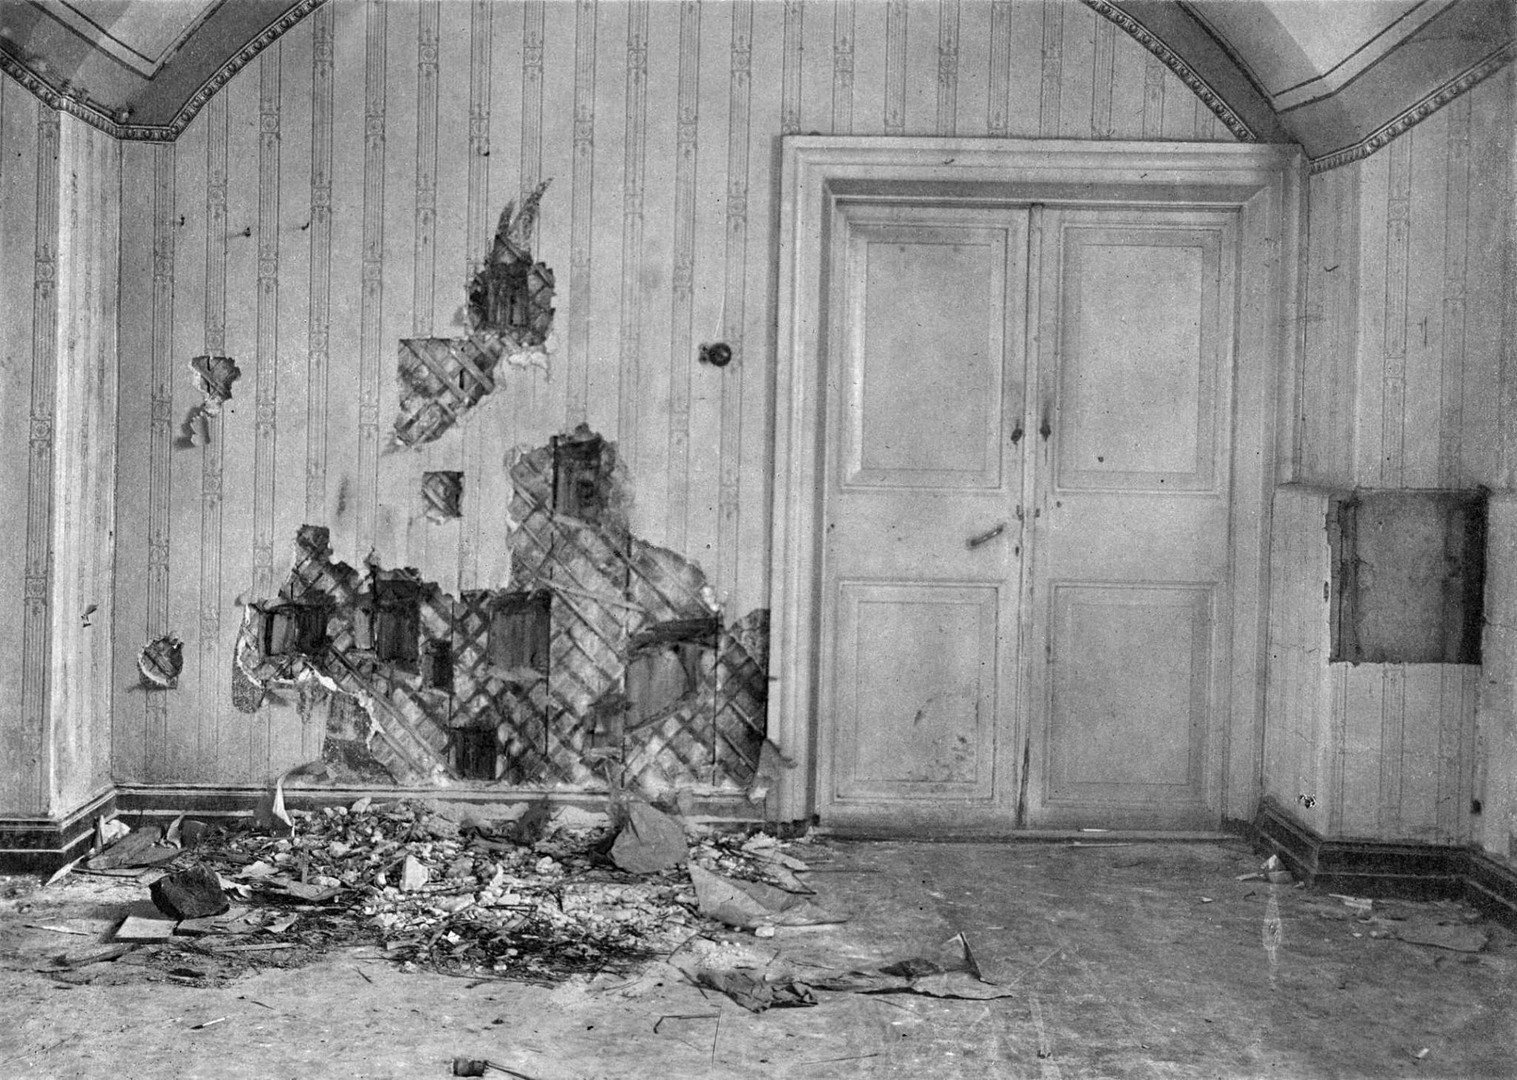 Room in the Ipatiev House, Yekaterinburg, where the Russian Royal family was murdered, 1918. 